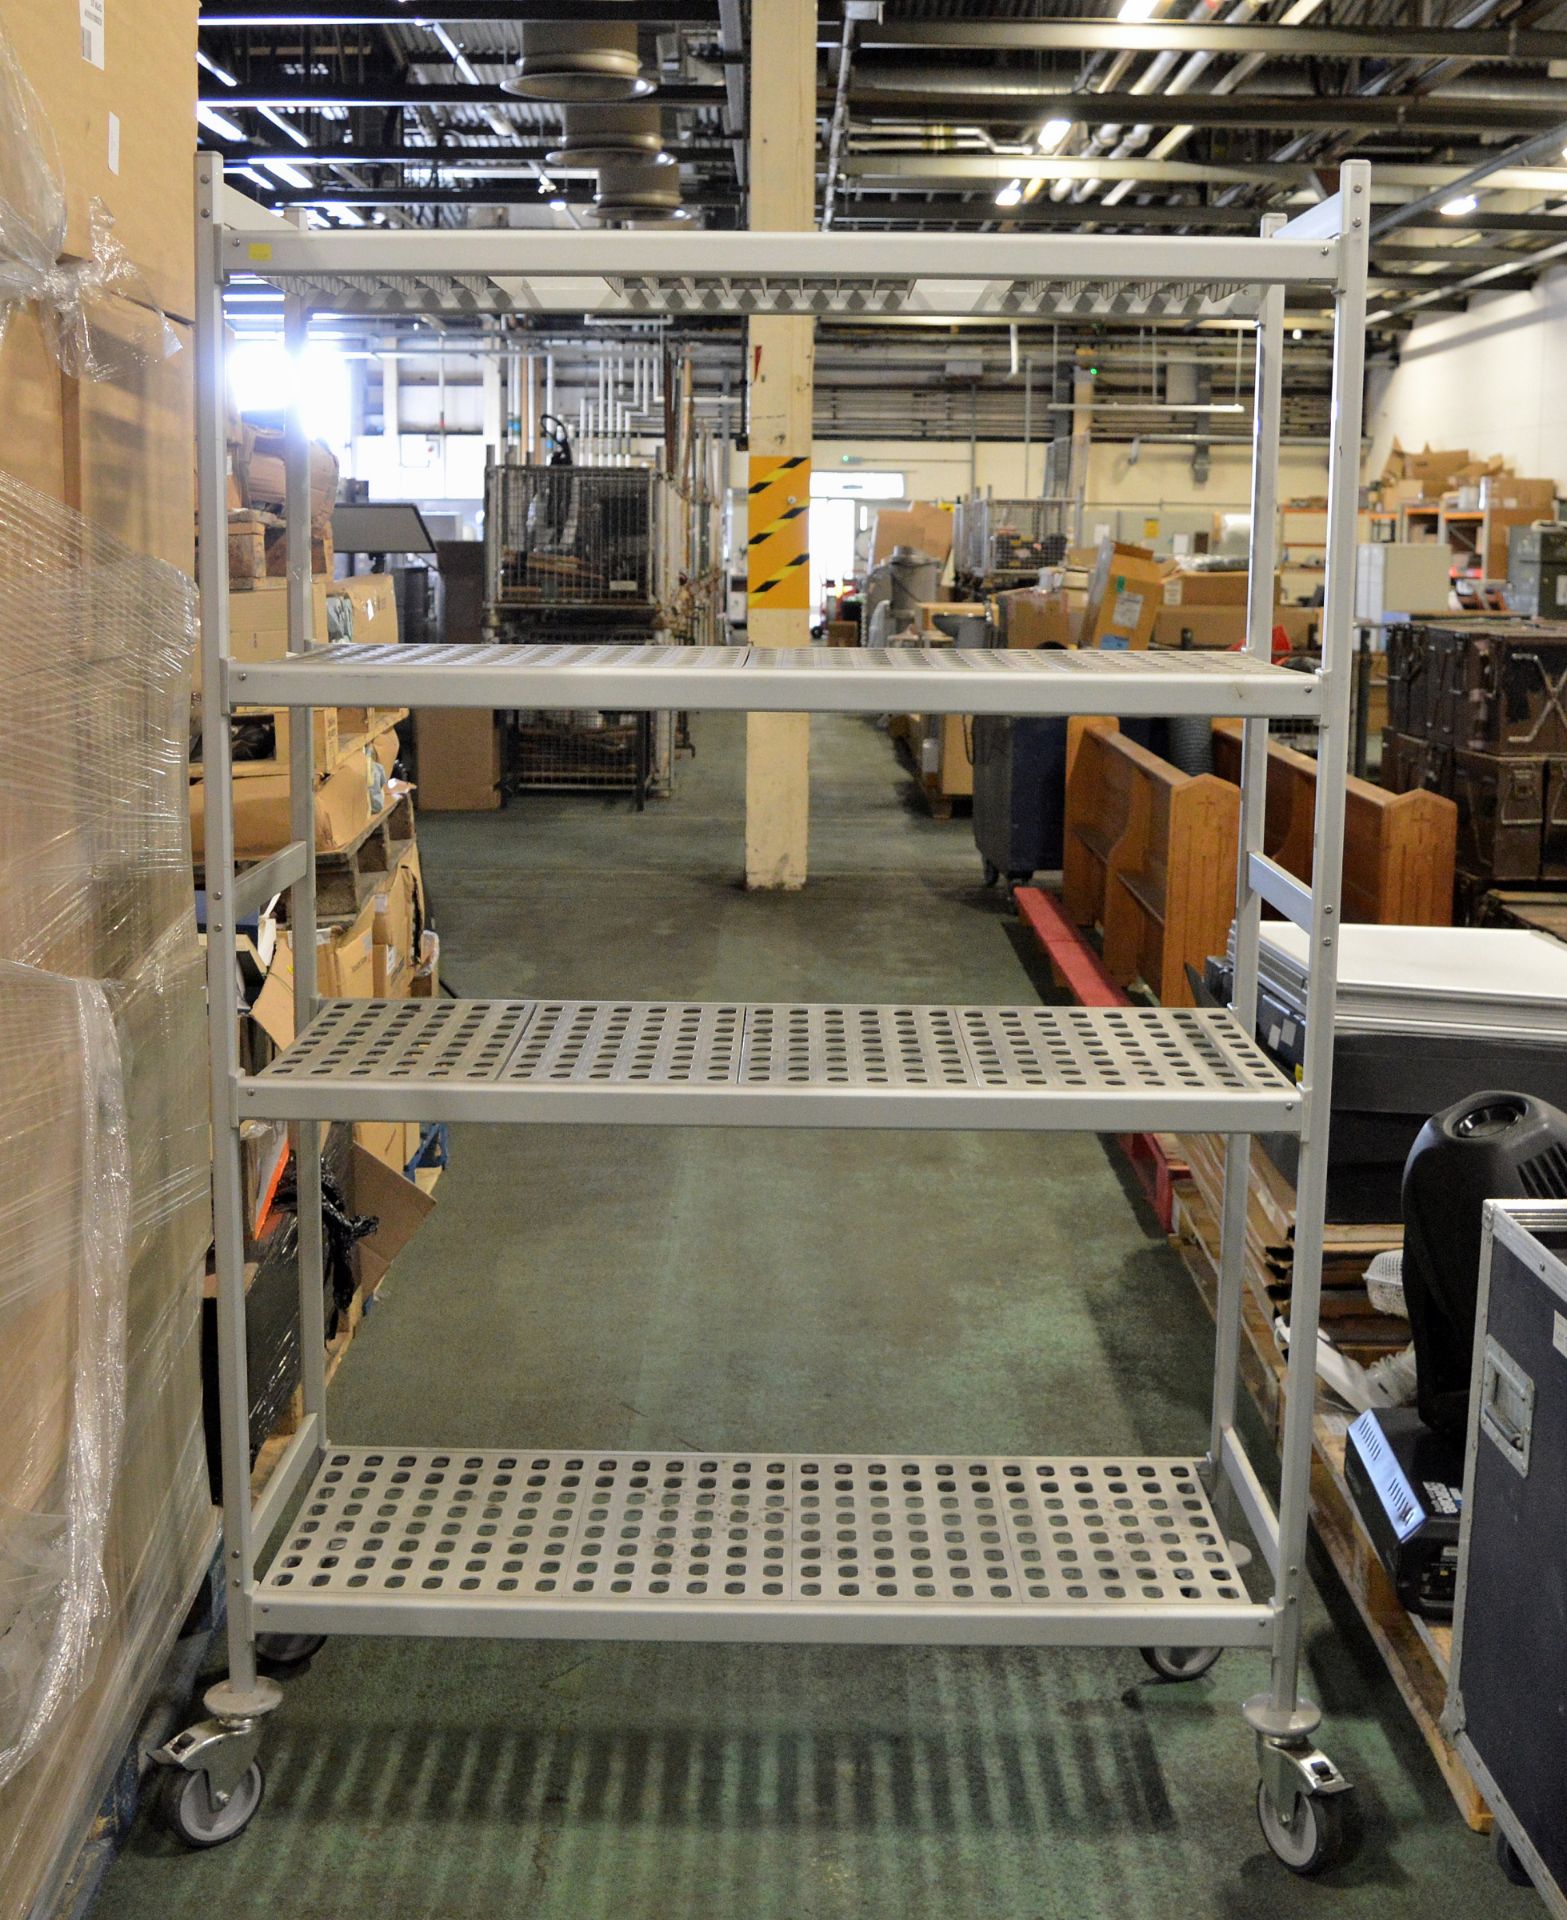 4 Tier Alloy And Plastic Mobile Racking L 1220mm x W 480mm x H 1880mm - Image 2 of 2